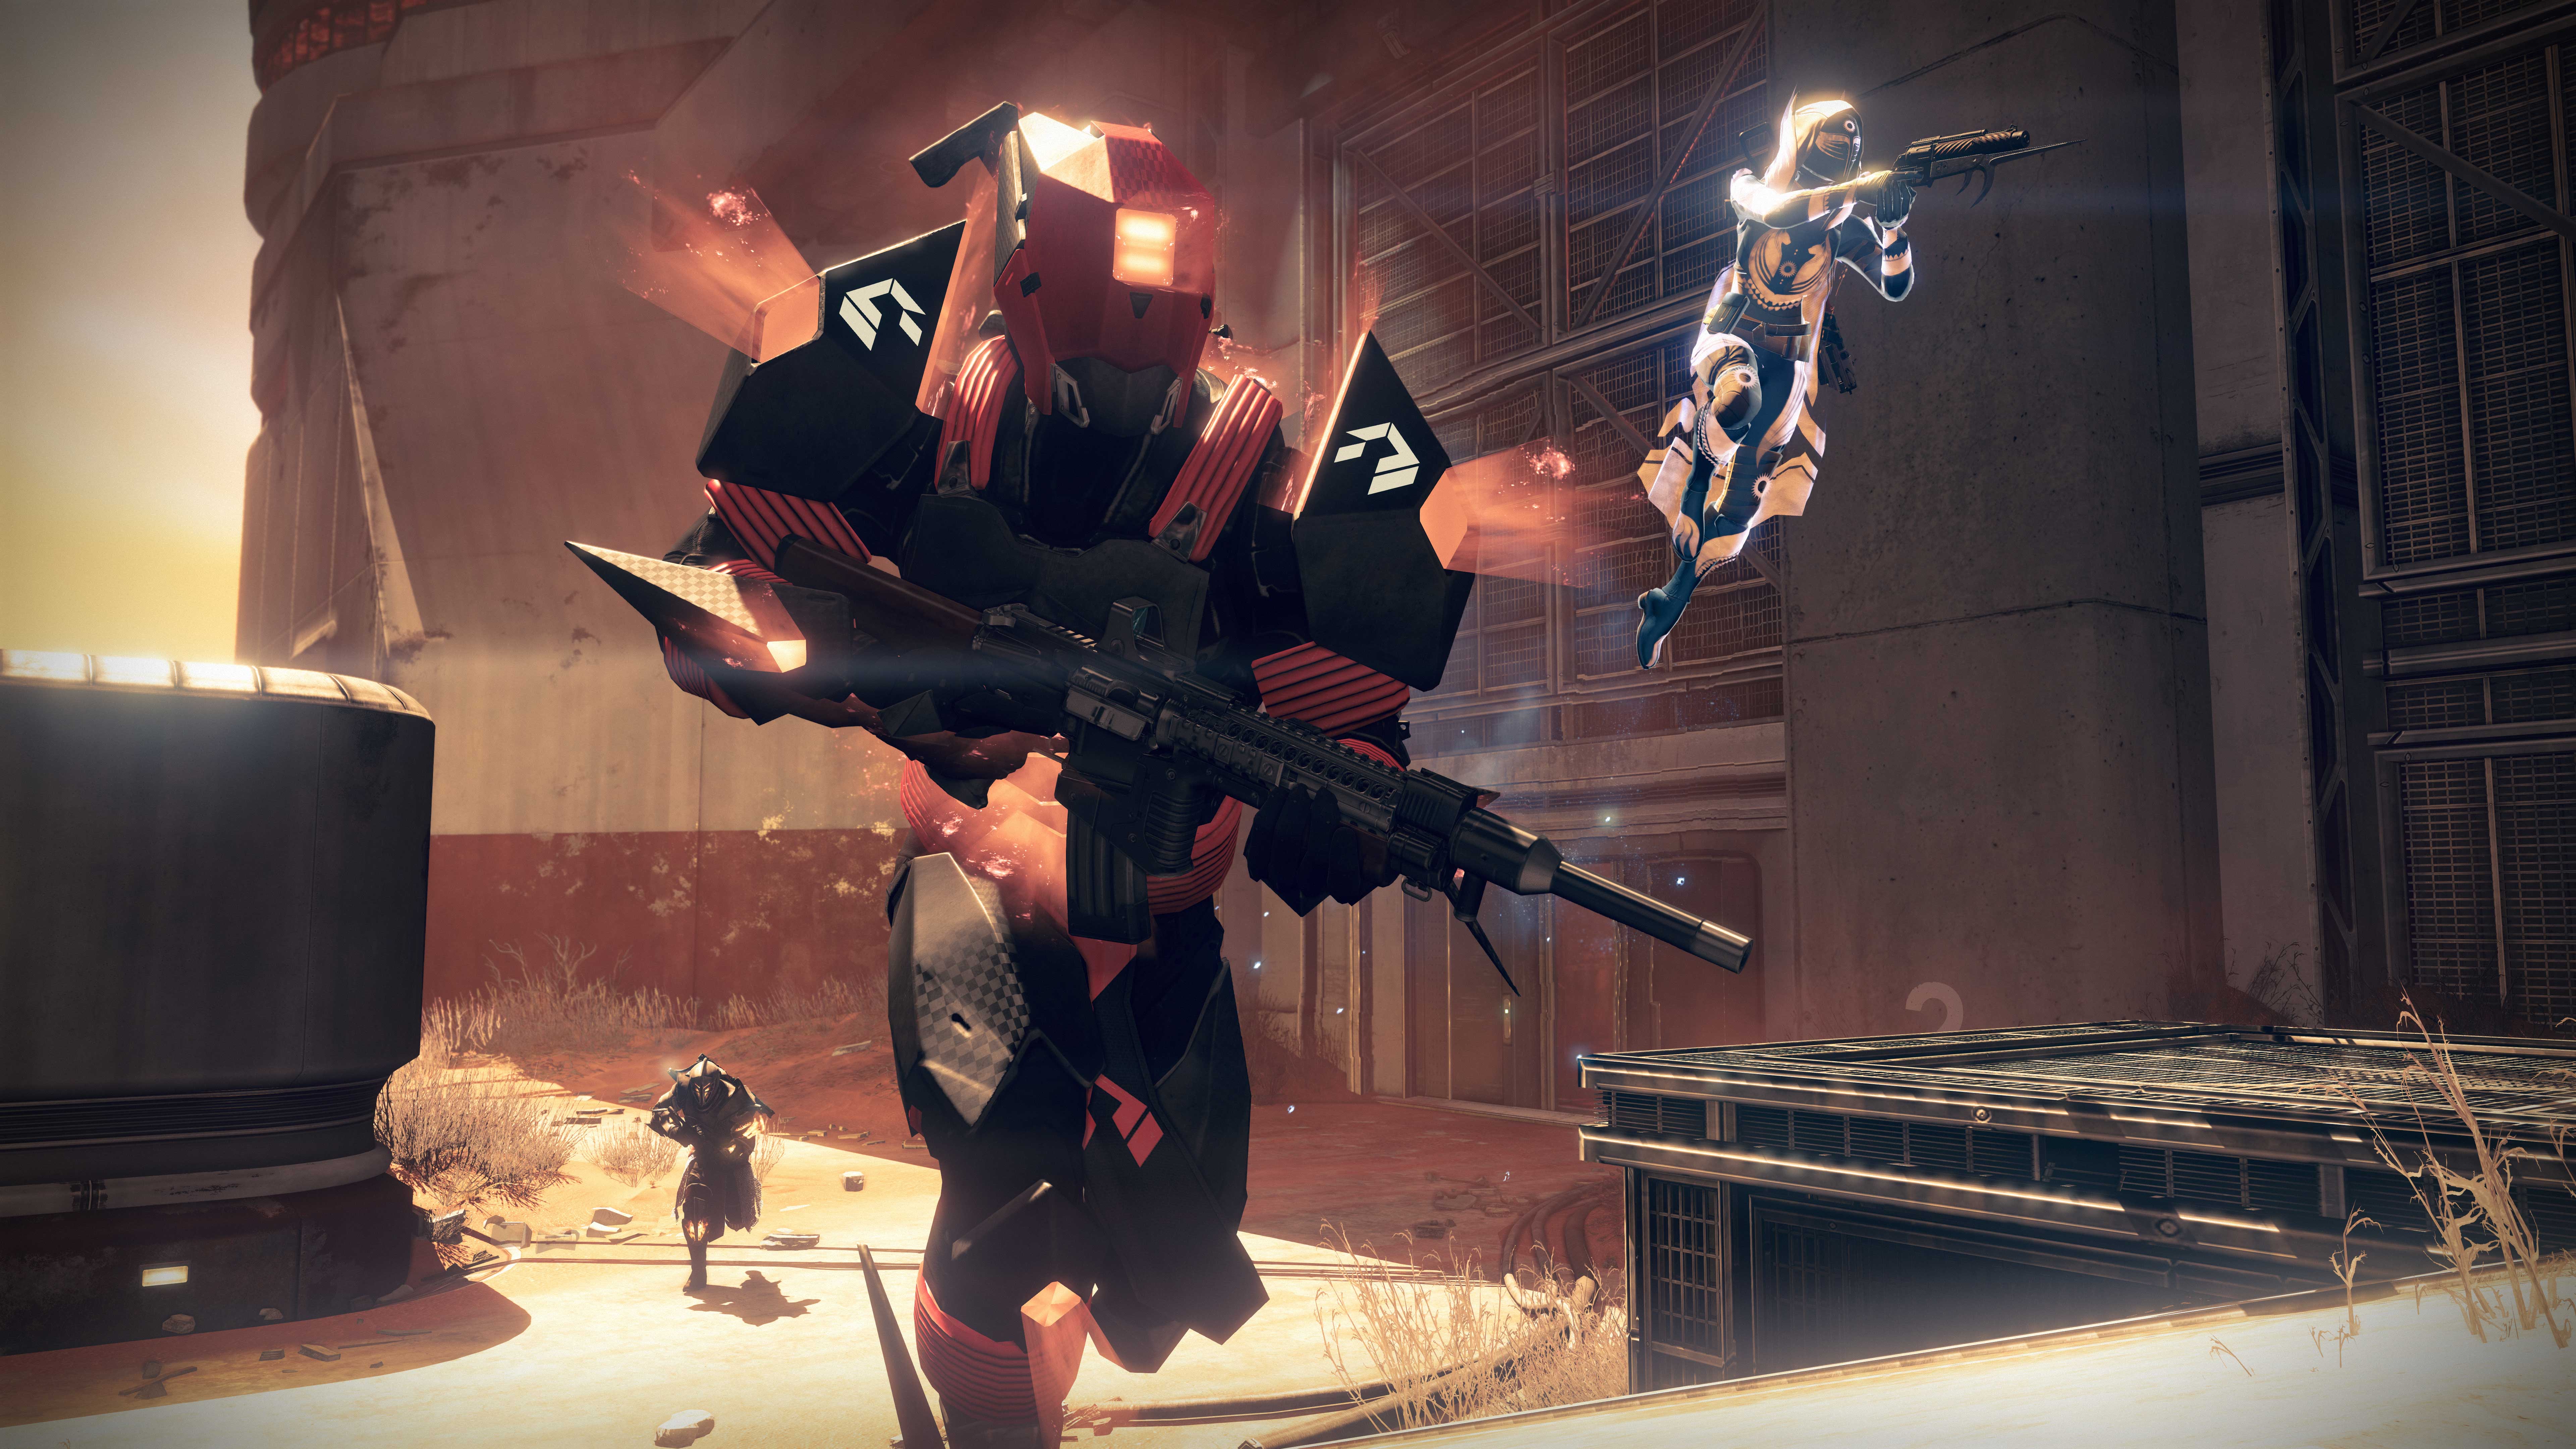 Image for Destiny weekly reset for July 4 – Nightfall, Crucible, Challenge of Elders, featured raid changes detailed